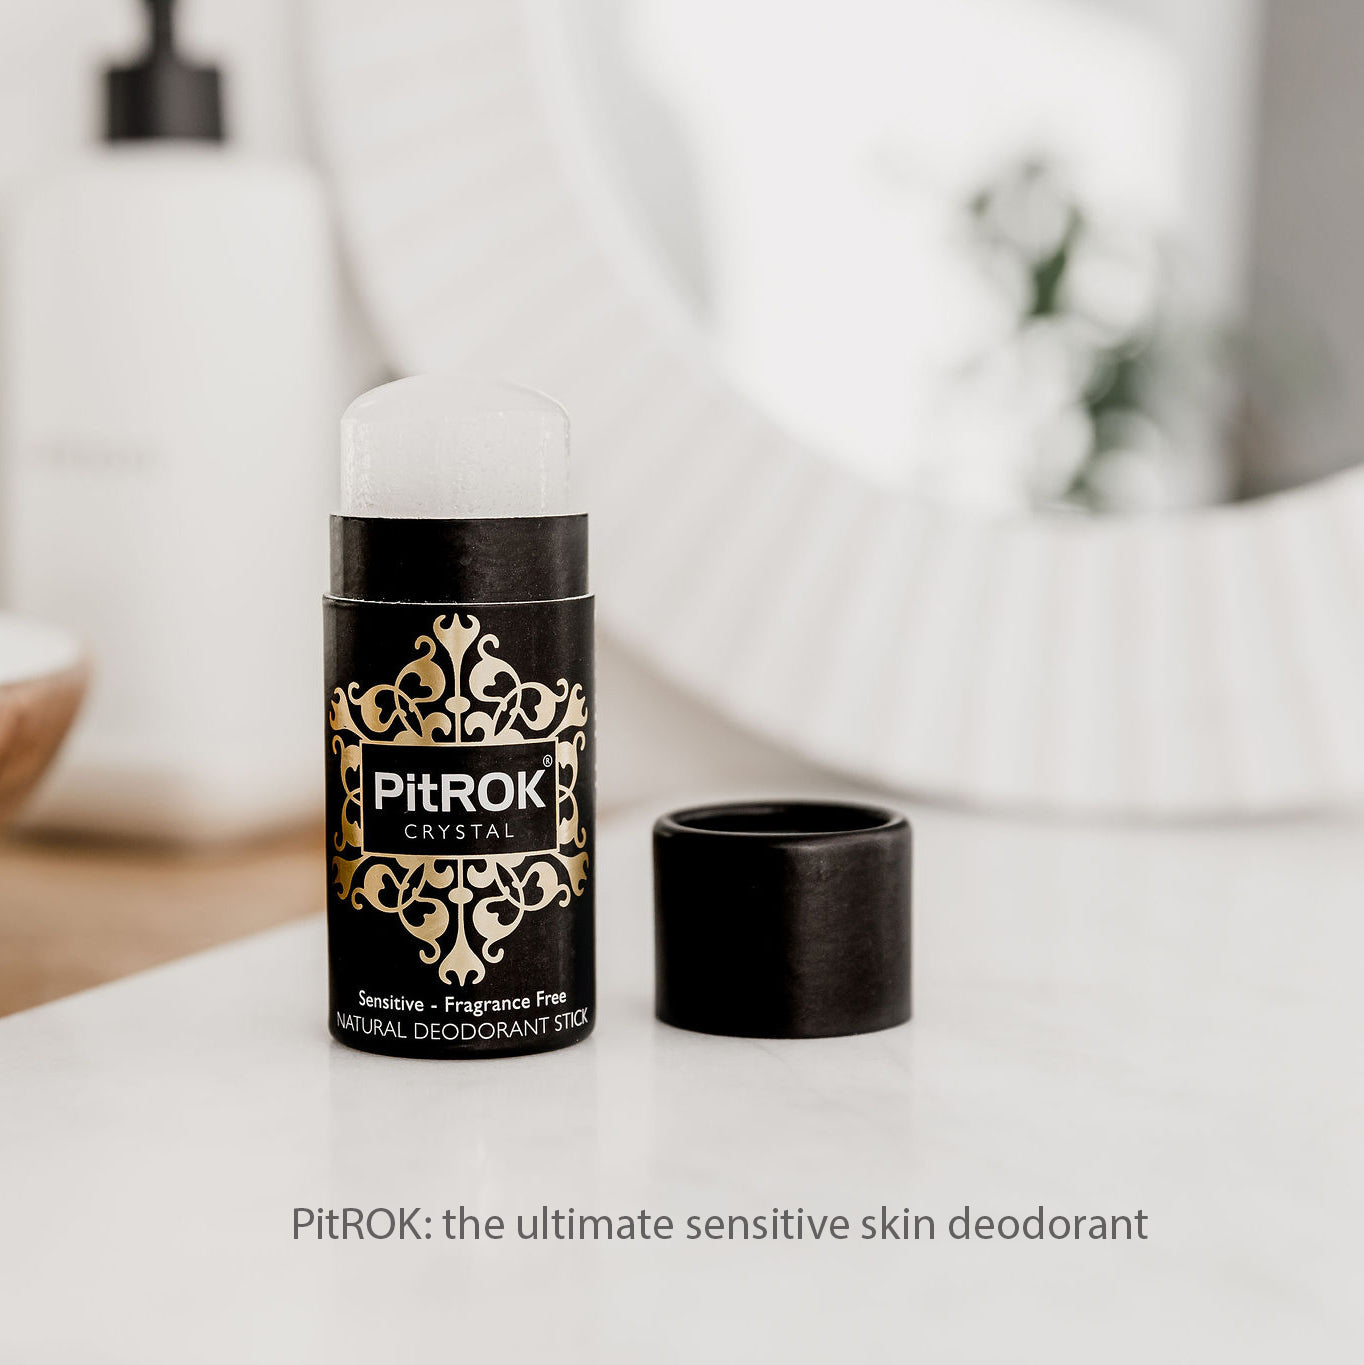 PitROK Crystal Natural Deodorant Stick 100g - CARDBOARD TUBE 'Push-Up' Format. Ready to use or use to refill your PitROK original holder.